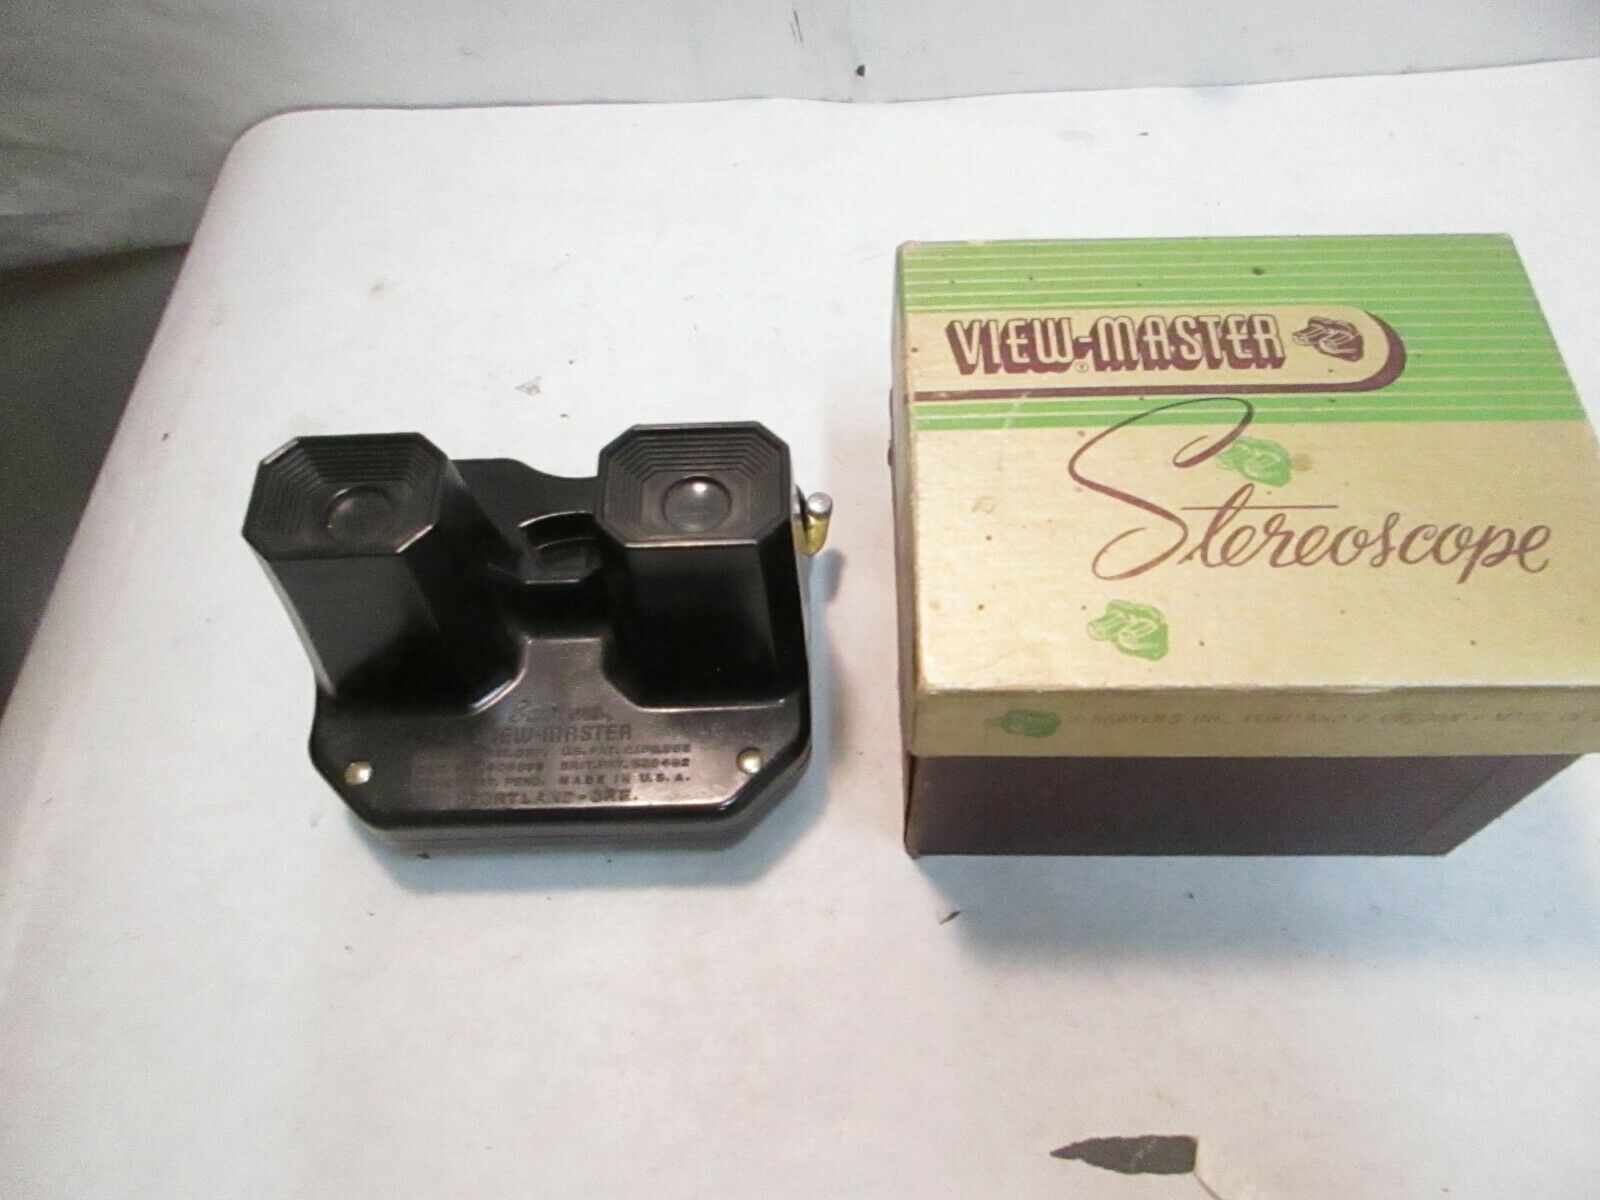 Vintage Sawyers View Master Stereoscope Model C With Original Box